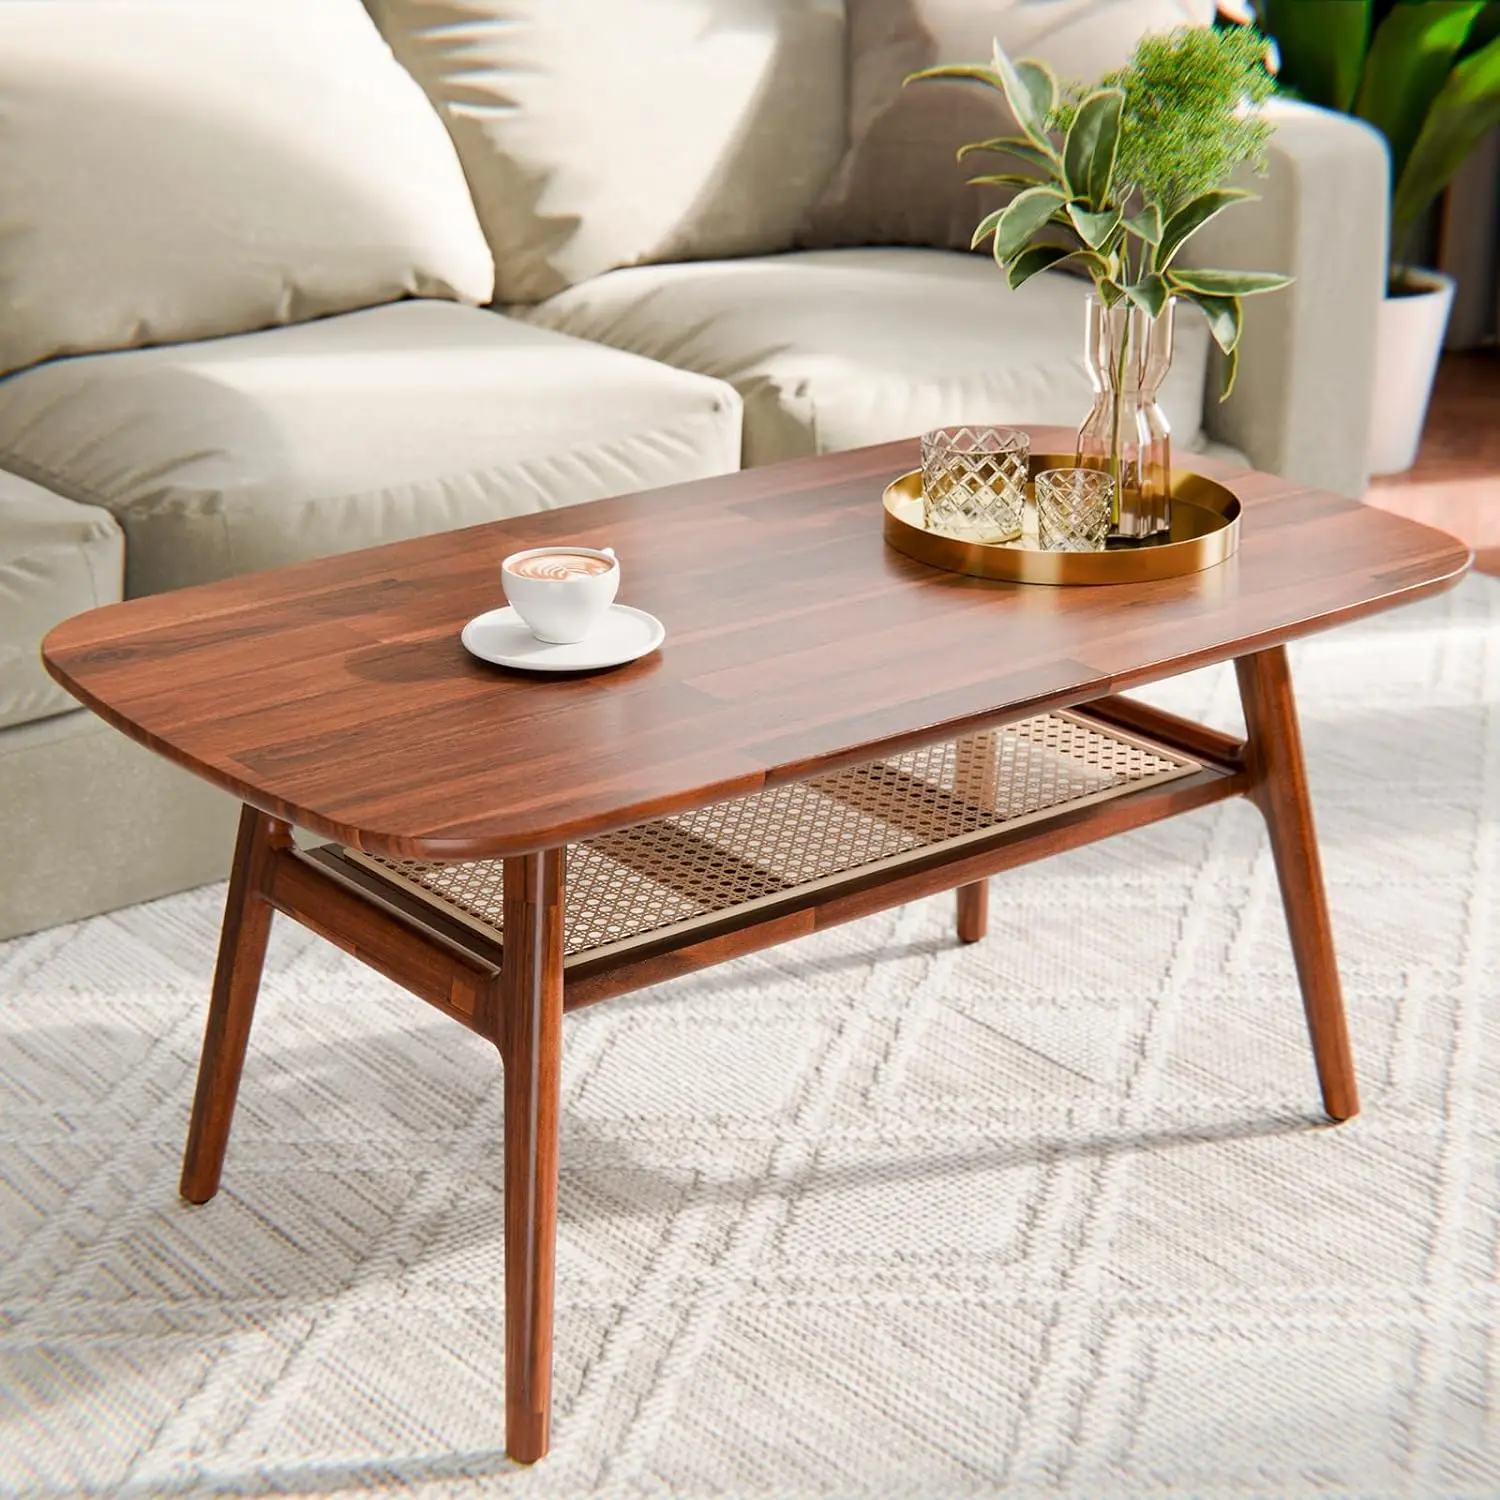 

Bme Nancy Solid Acacia Wood Coffee Table for Living Room, Spacious Oval-Shaped 237 Lbs Top Capacity, Rattan Shelf Below